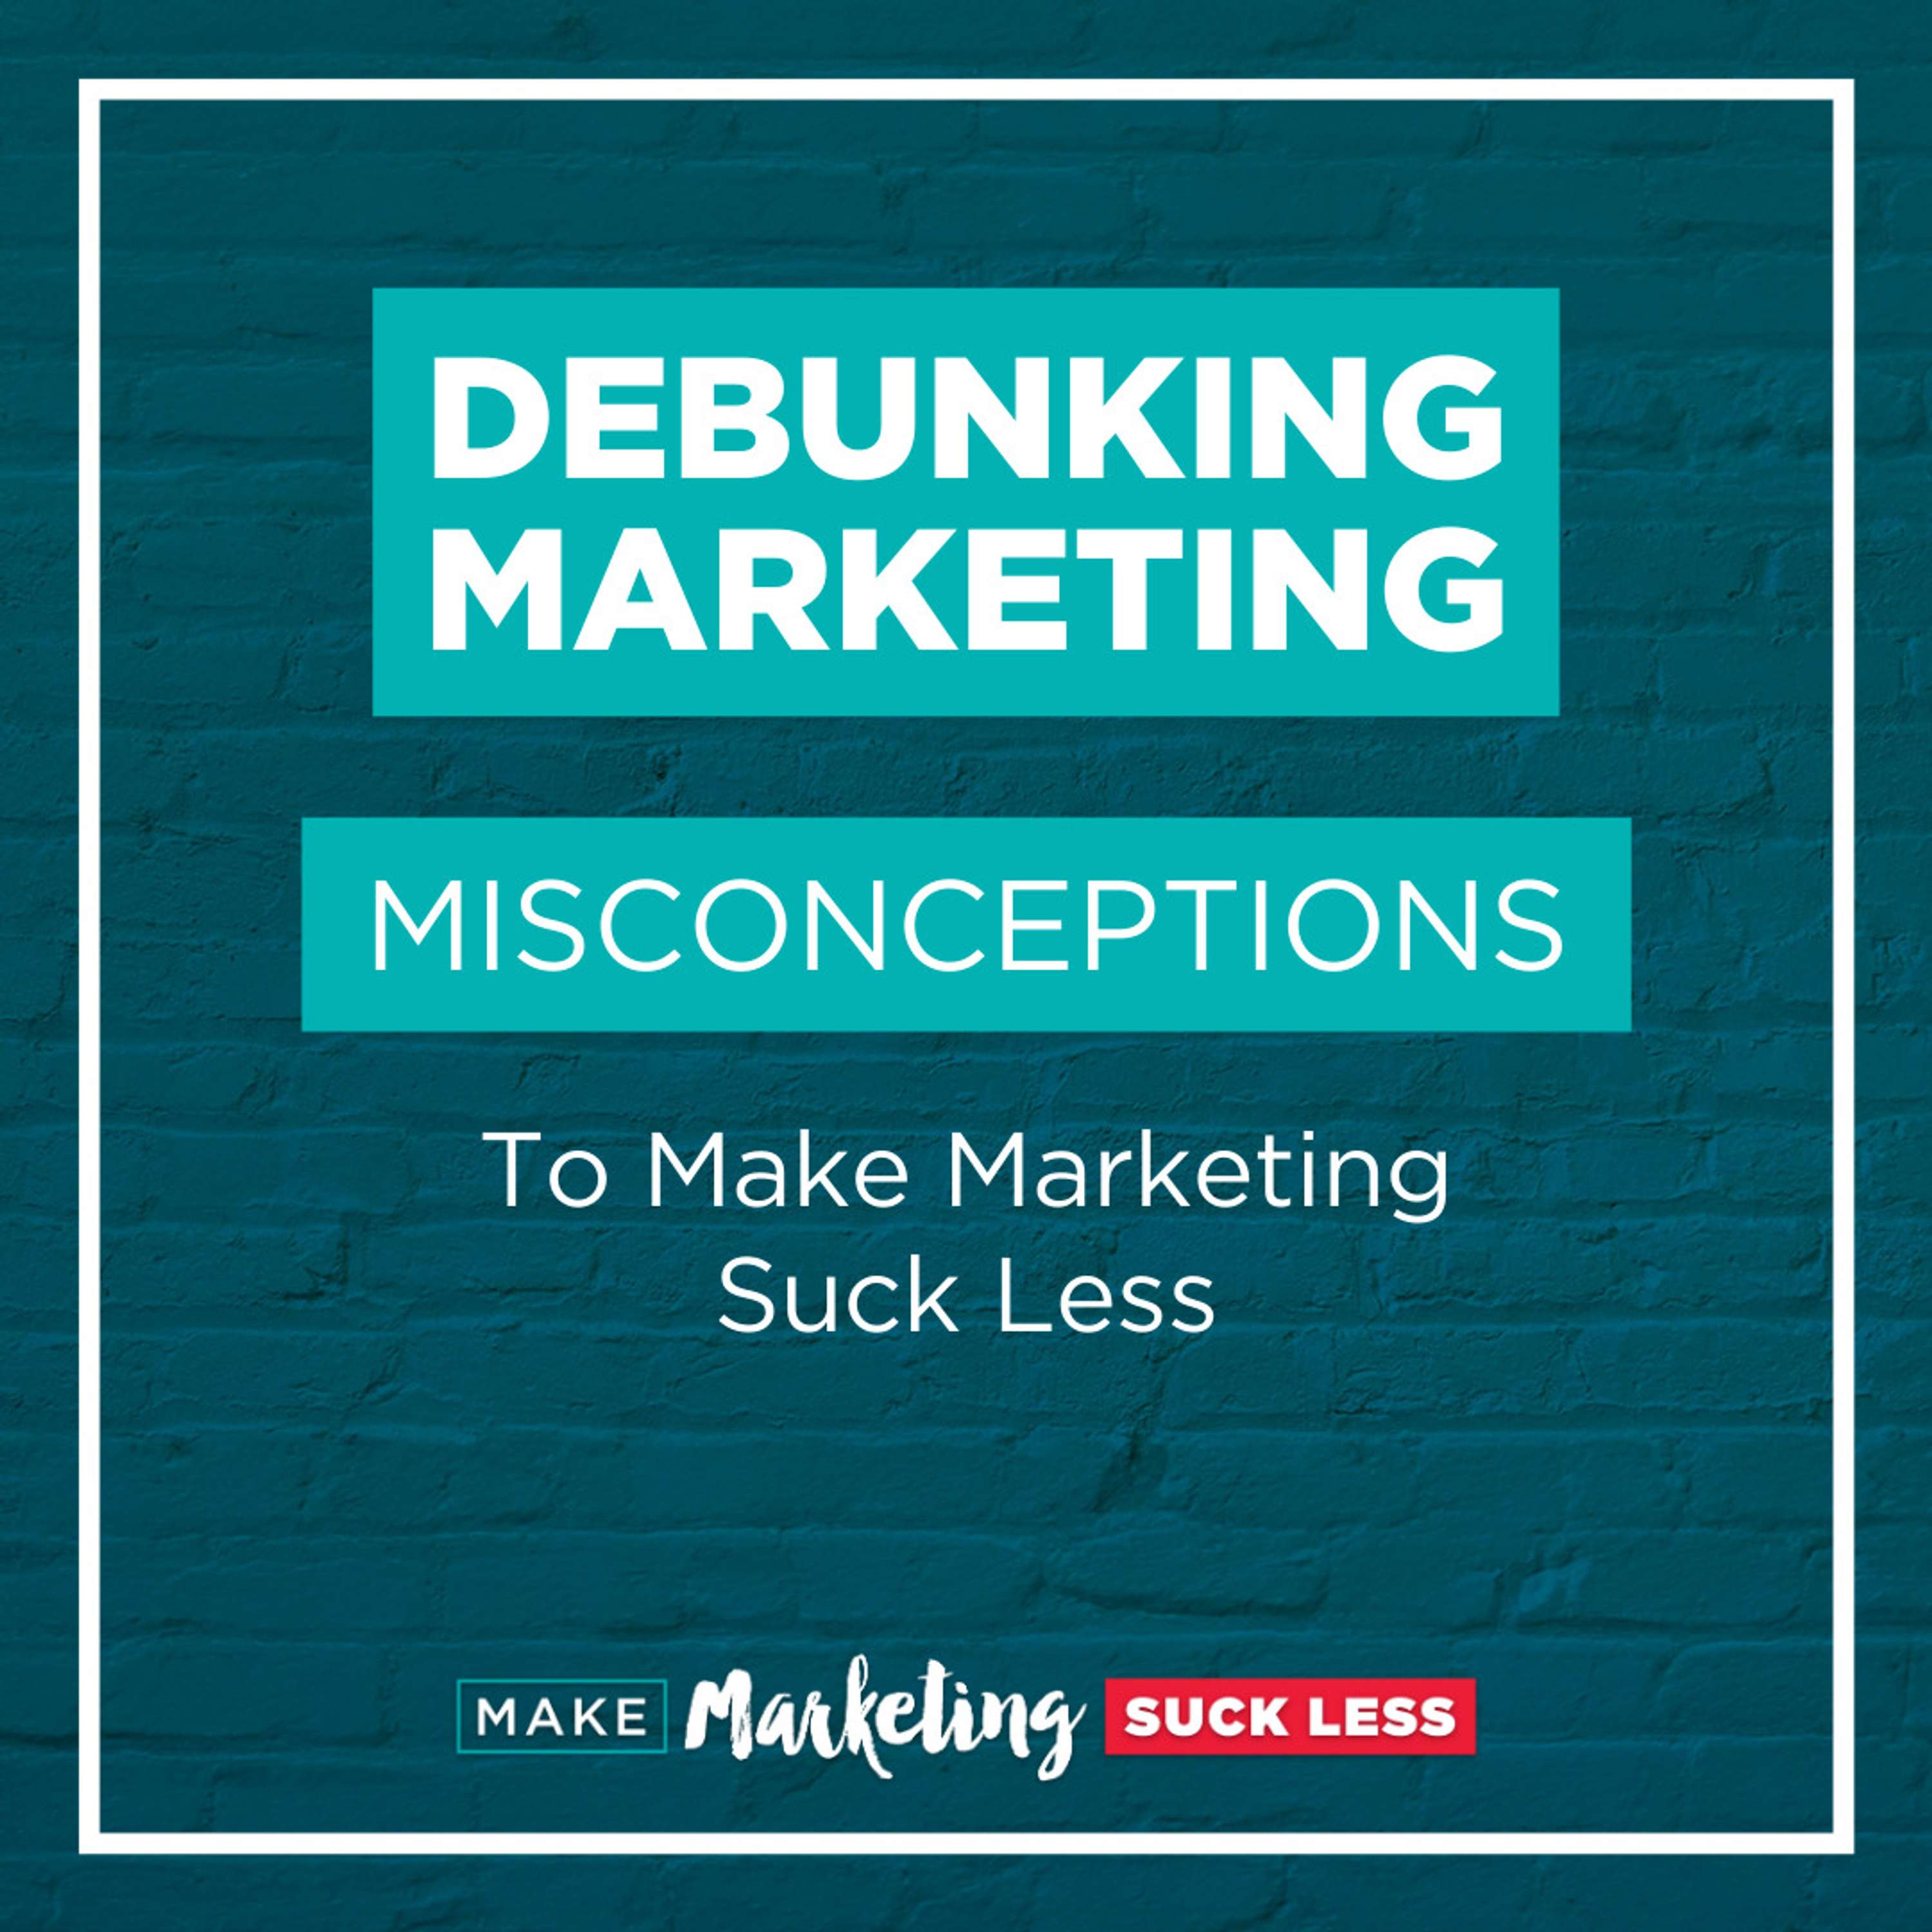 Debunking Marketing Misconceptions To Make Marketing Suck Less